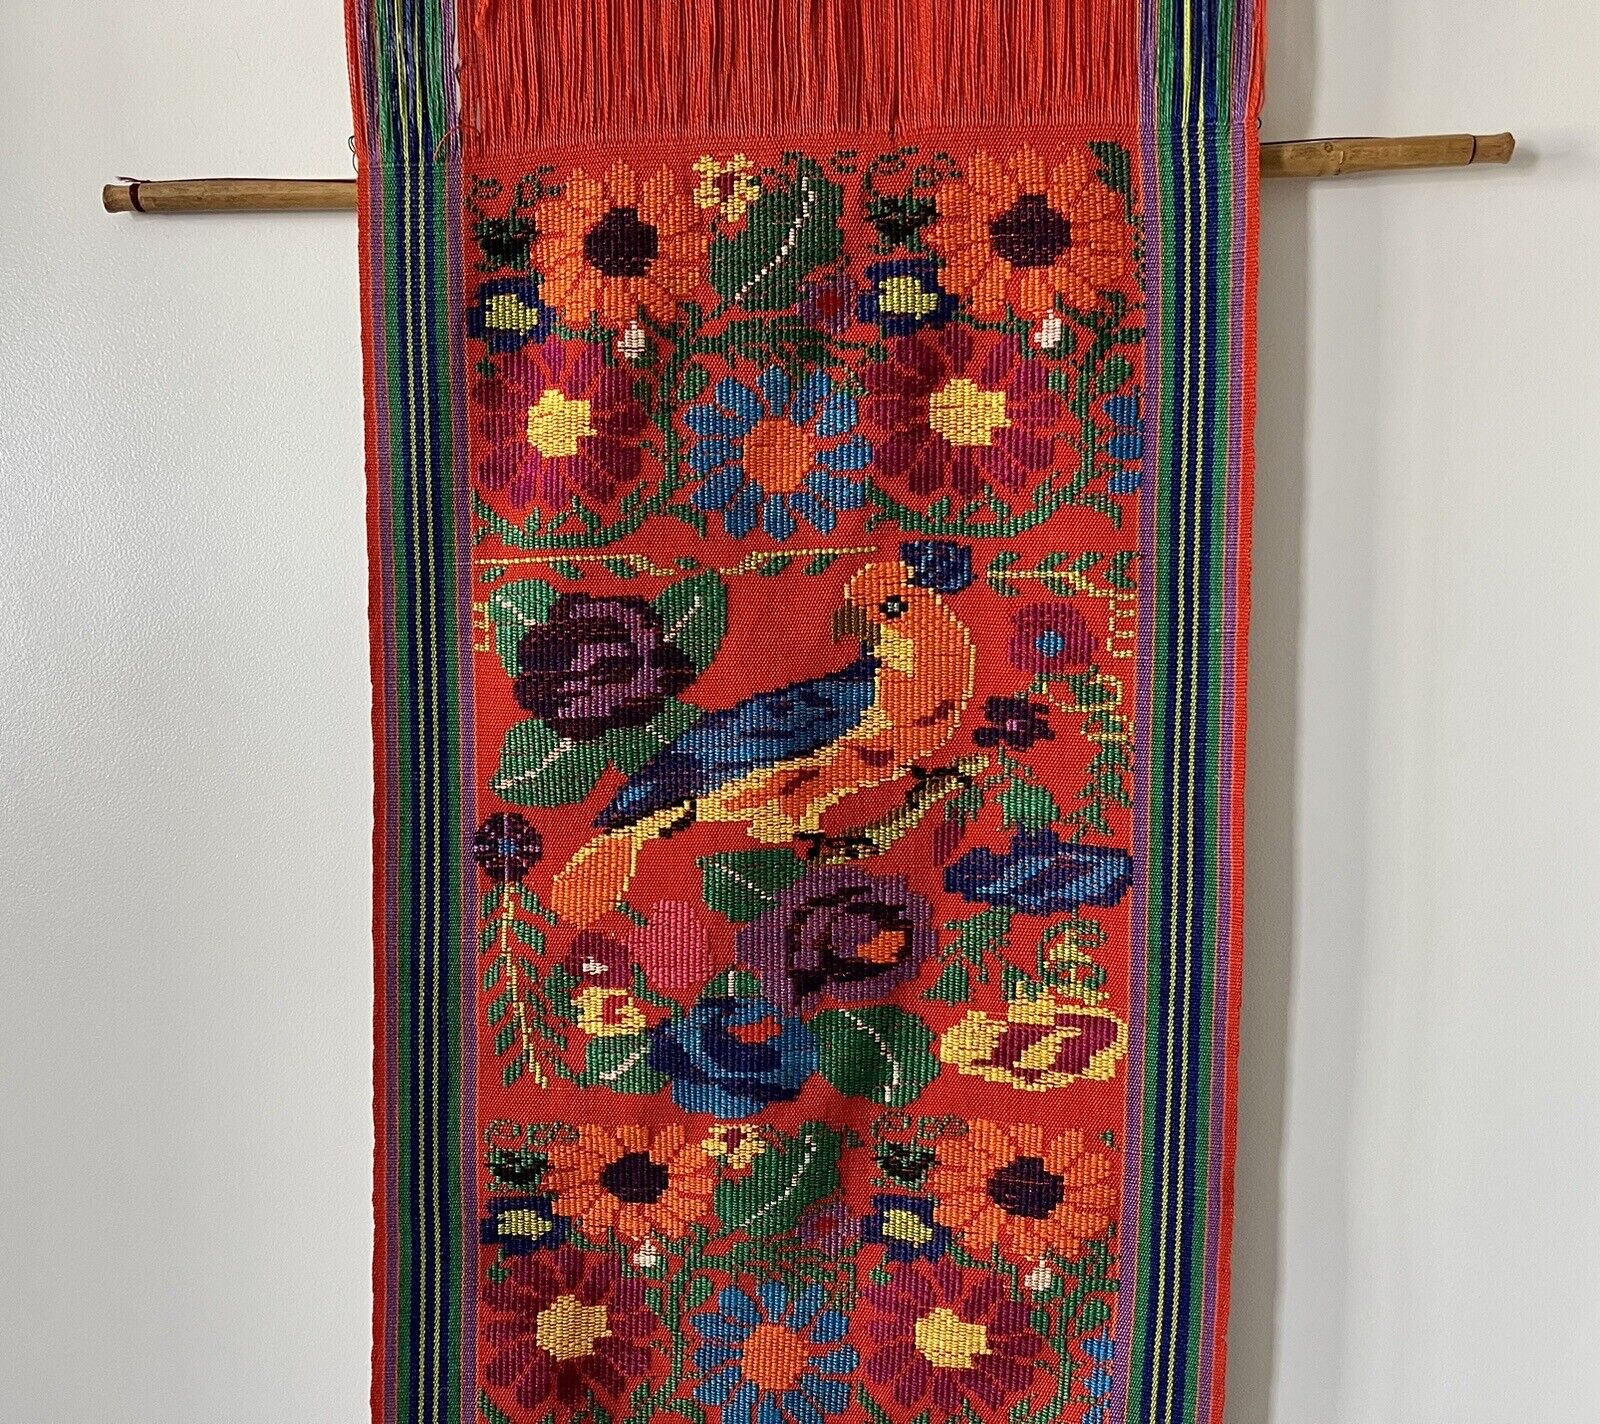 VTG Cultural Hand Woven Tapestry Wall Hanging Bird Flowers Colorful Wood Dowels